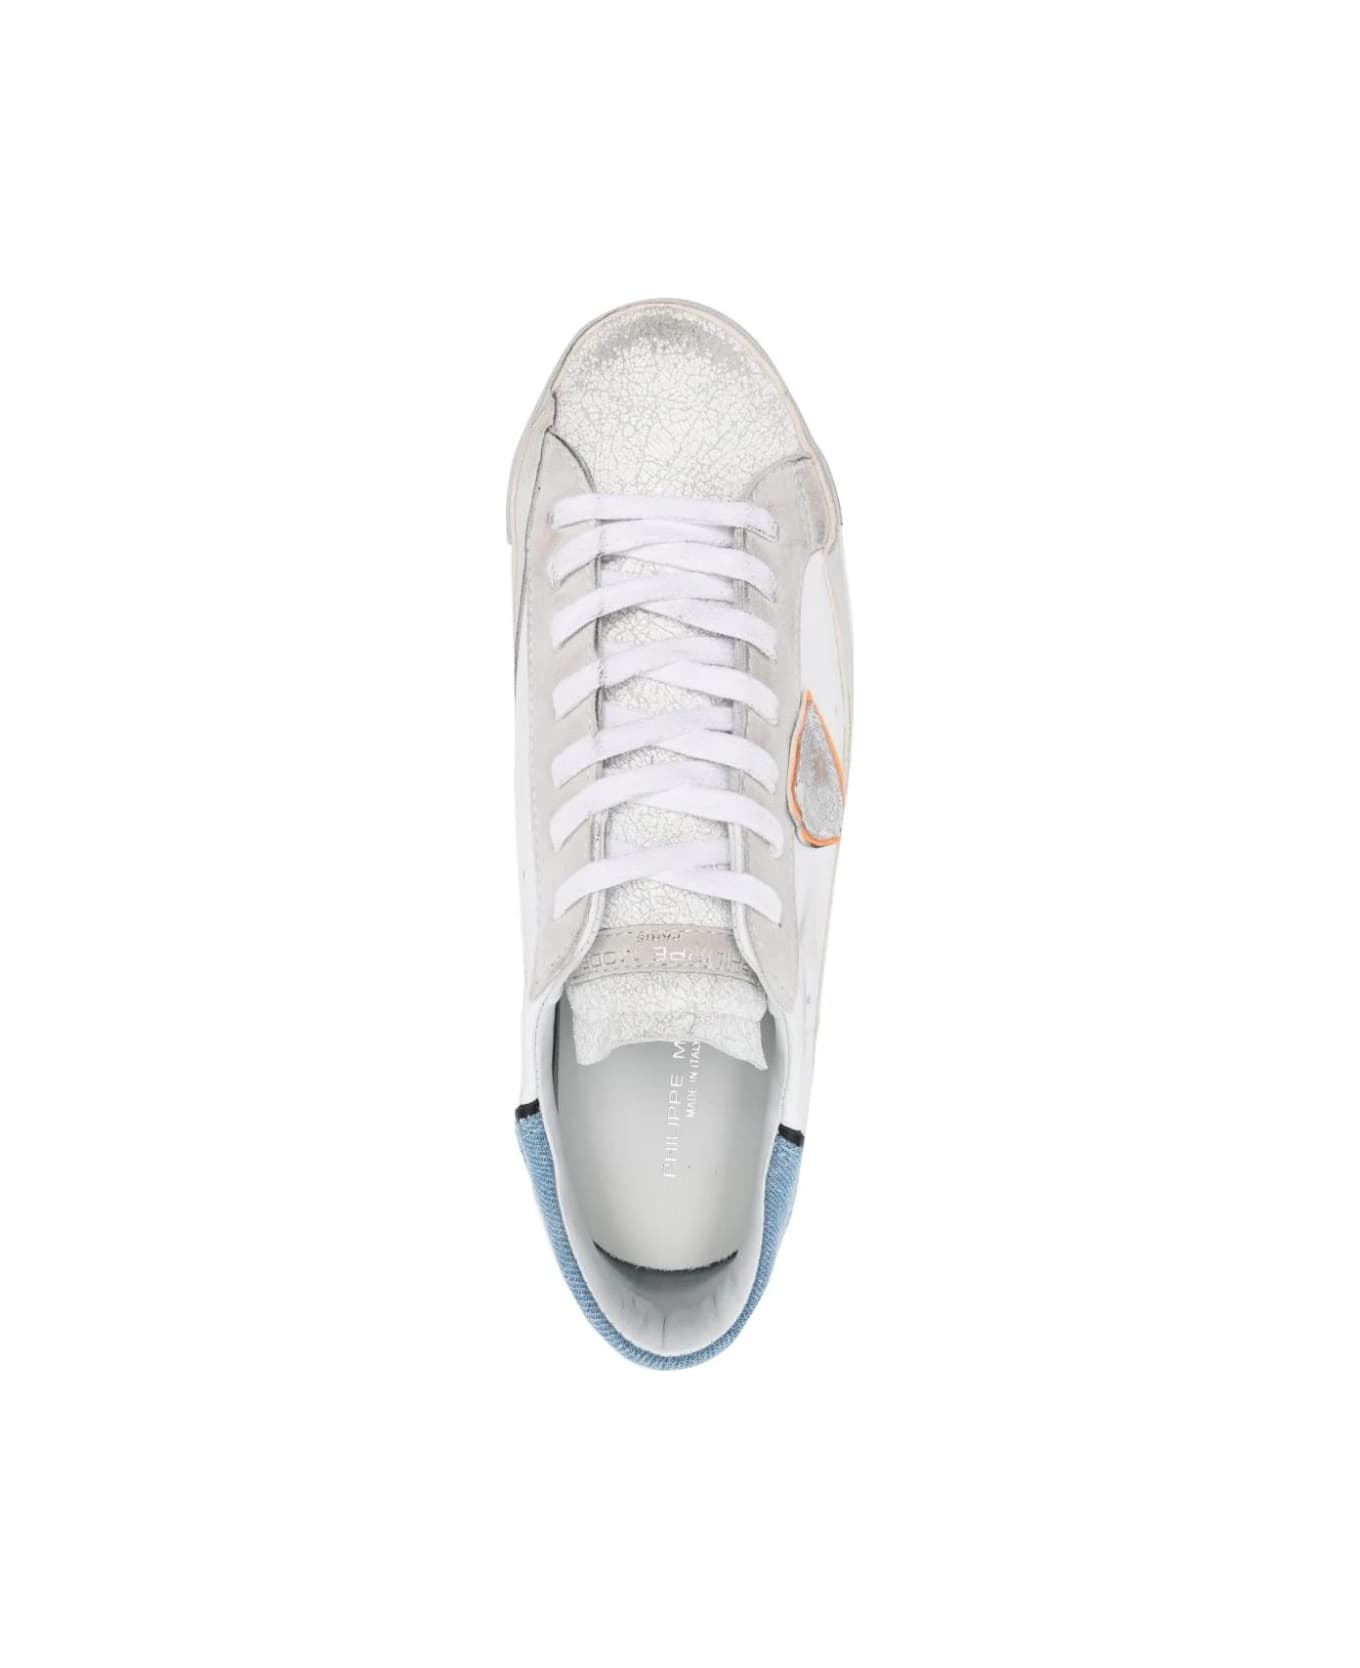 Philippe Model Prsx Low Sneakers - White And Light Blue スニーカー